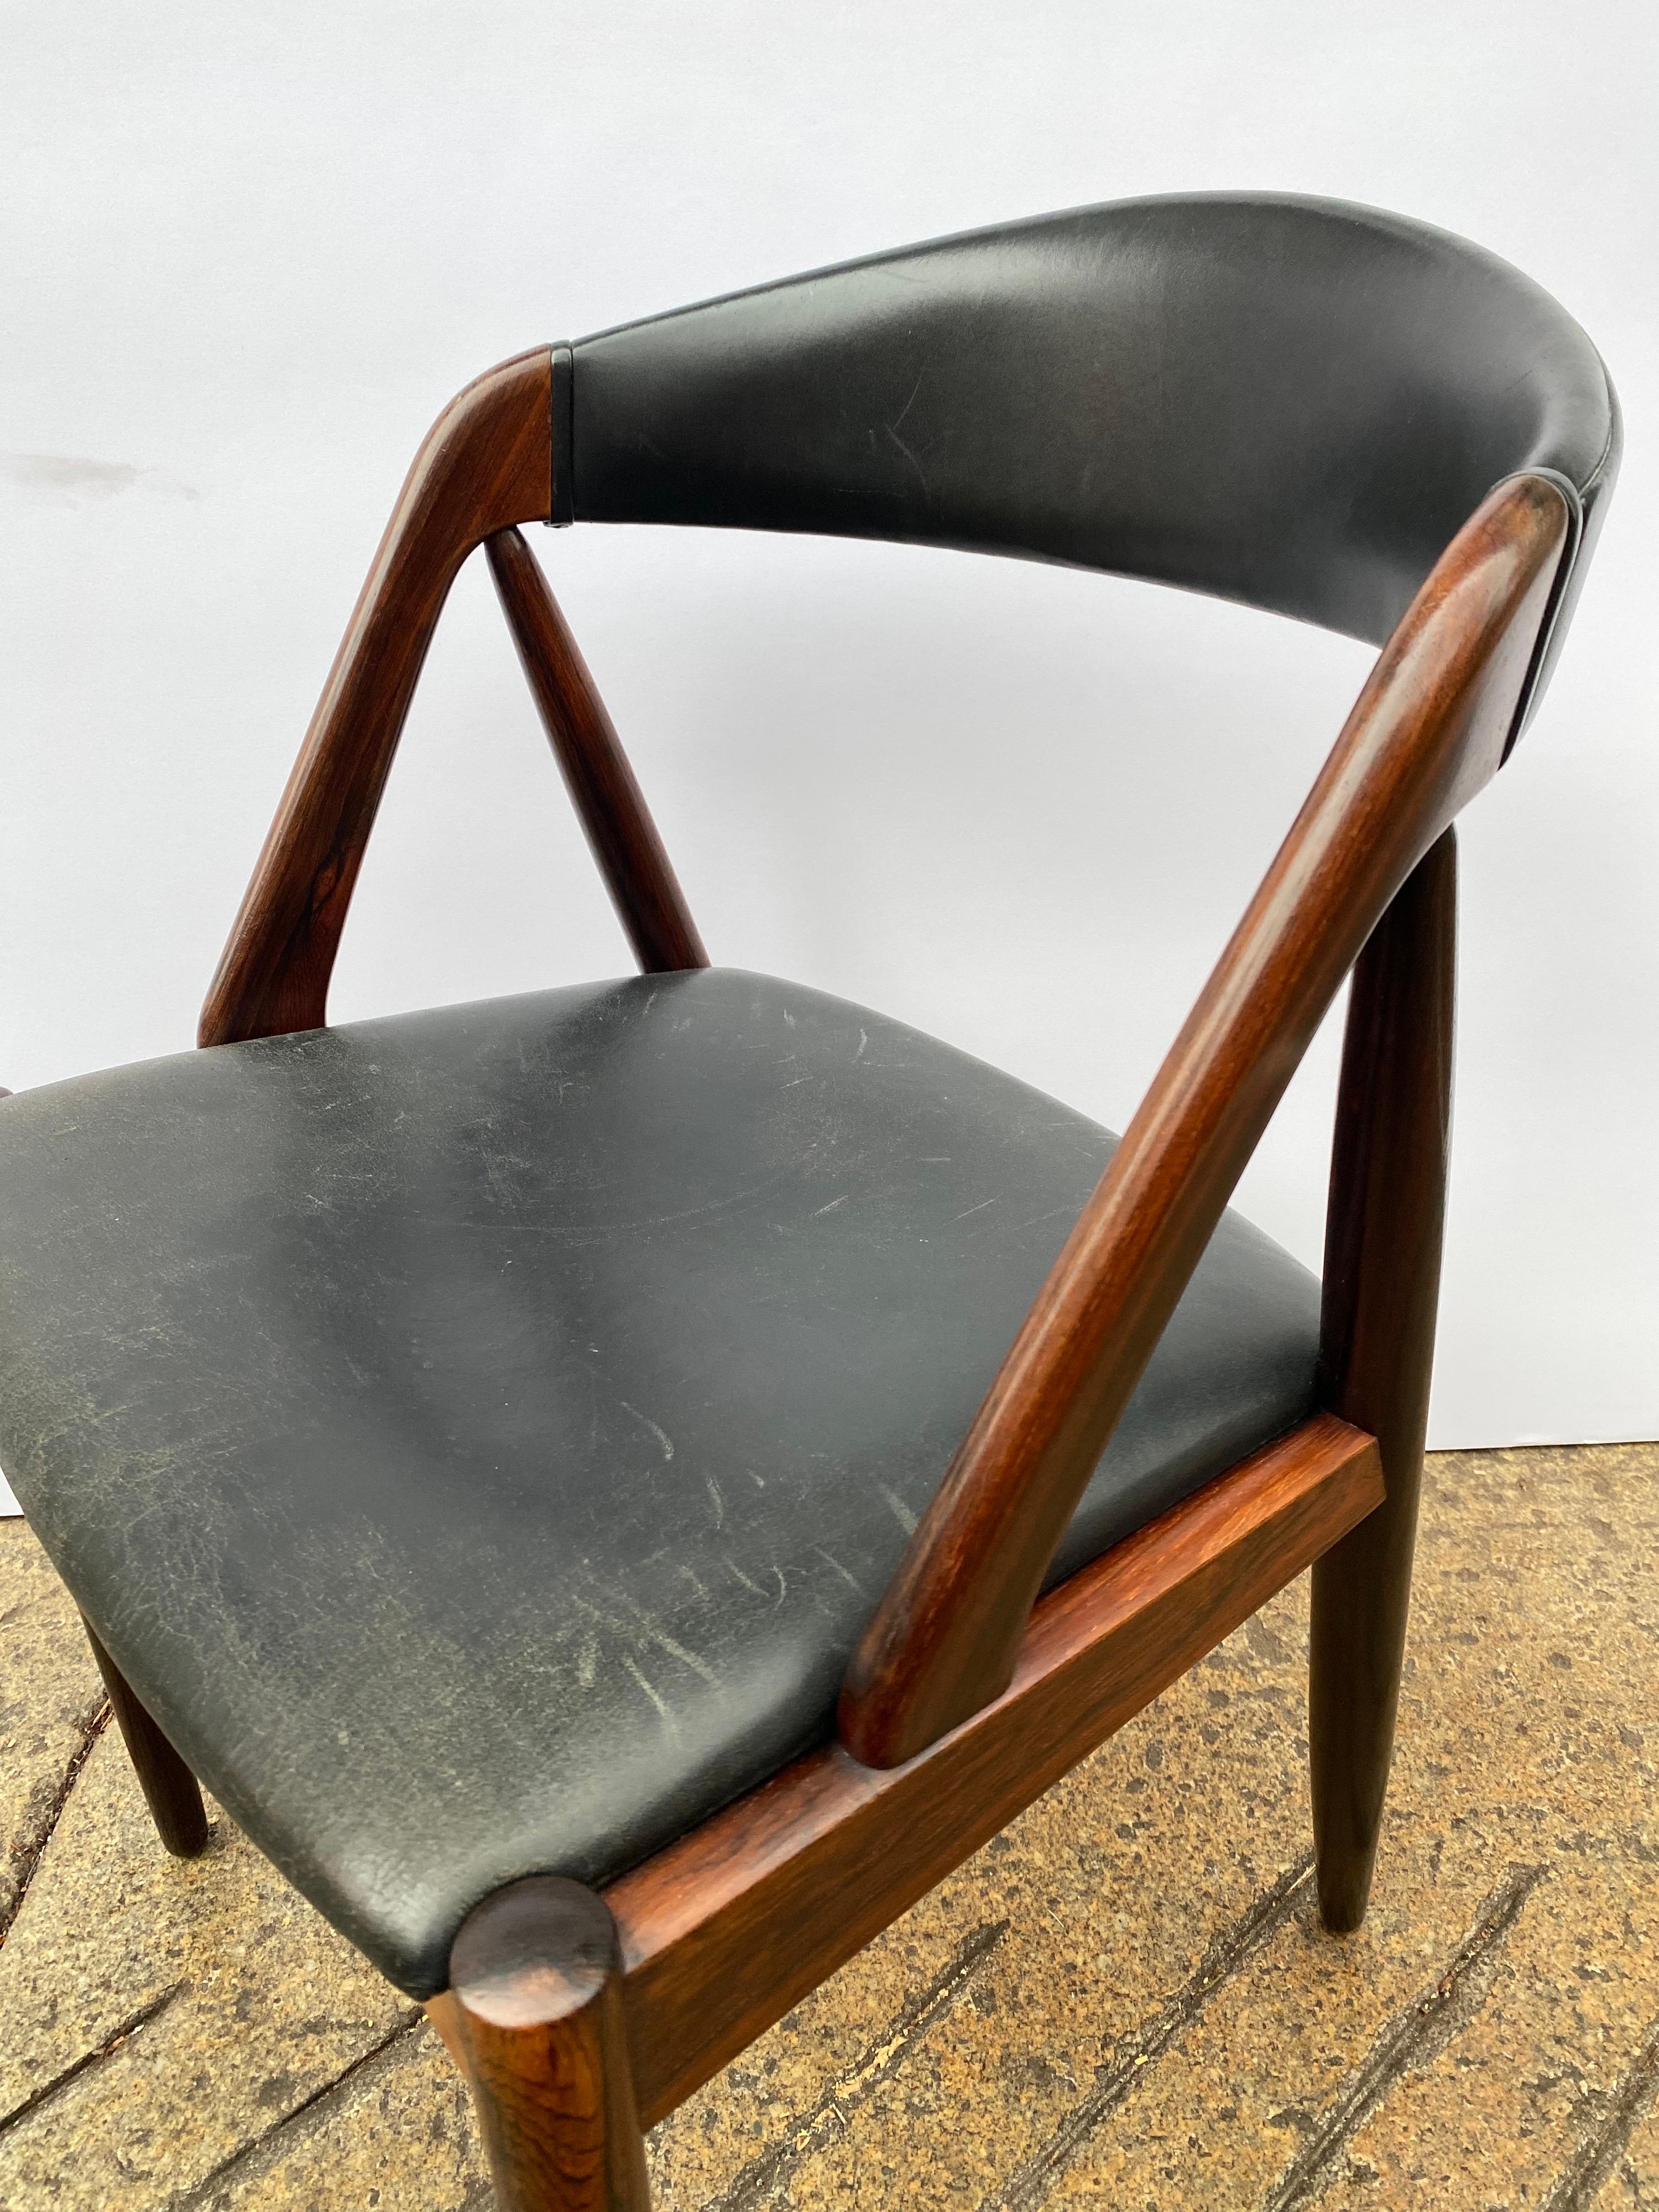 Kai Kristiansen rosewood and black leather dining or desk chair. Beautiful rosewood with the original leather seat pad. Overall chair is very solid! Leather shows typical signs of use and wear. Rosewood is rich in color with no fading!